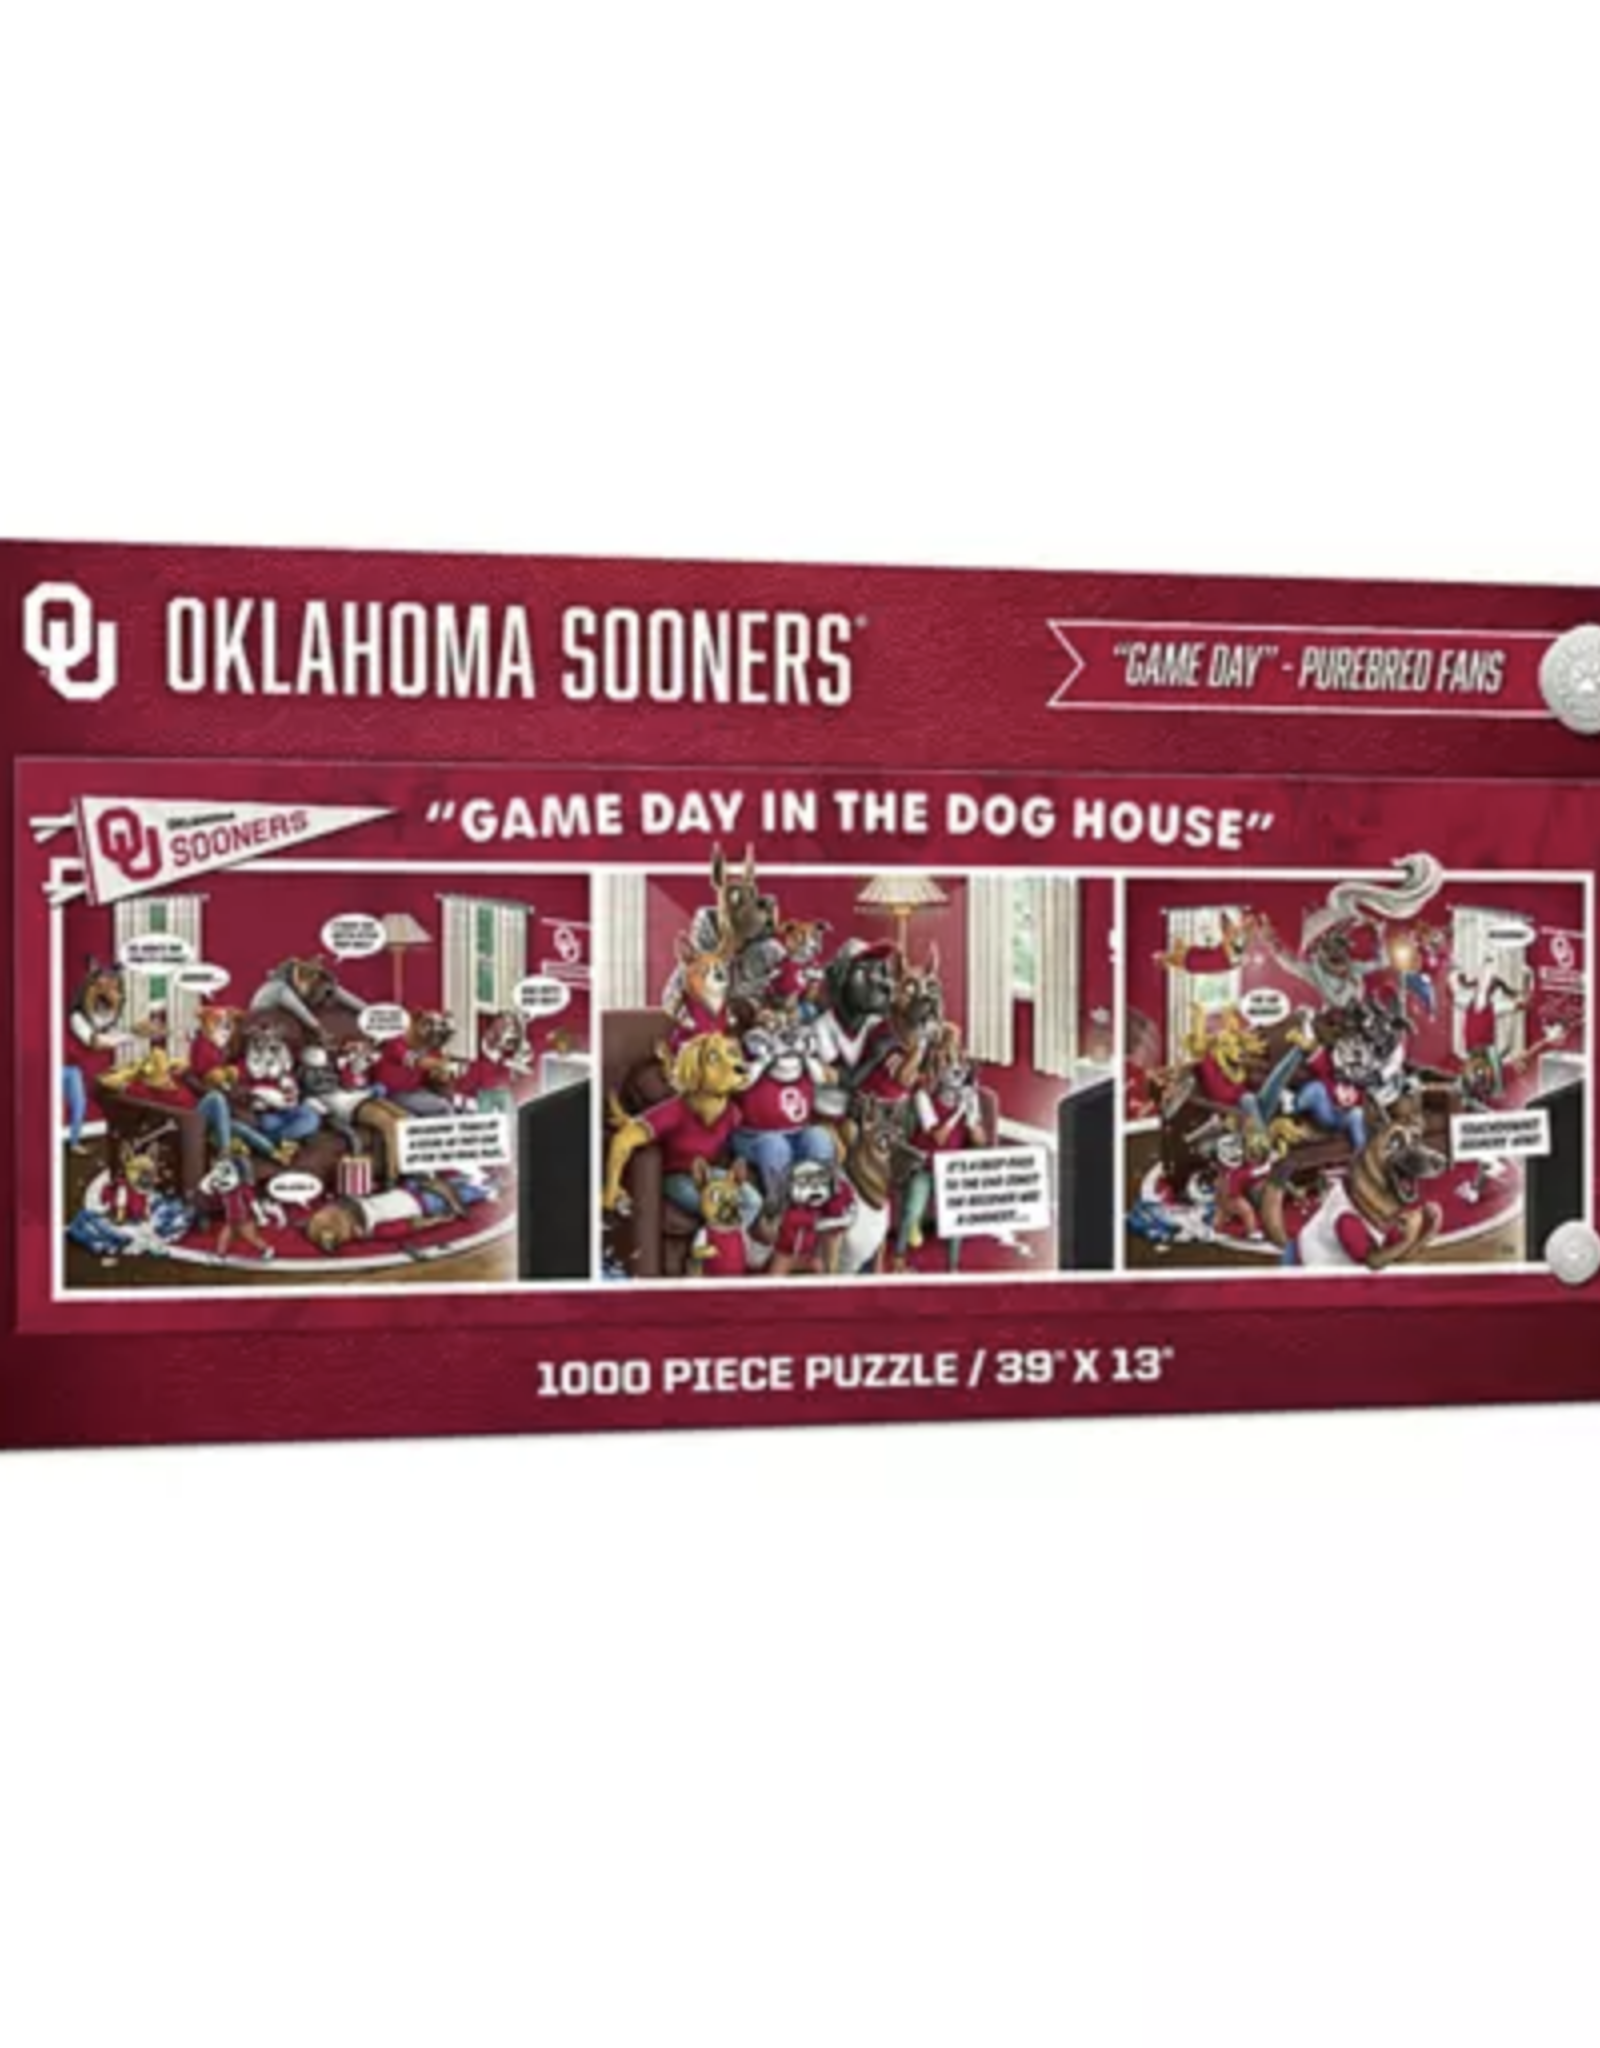 You The Fan Oklahoms Sooners Purebred Fans-Game Day in the Dog House